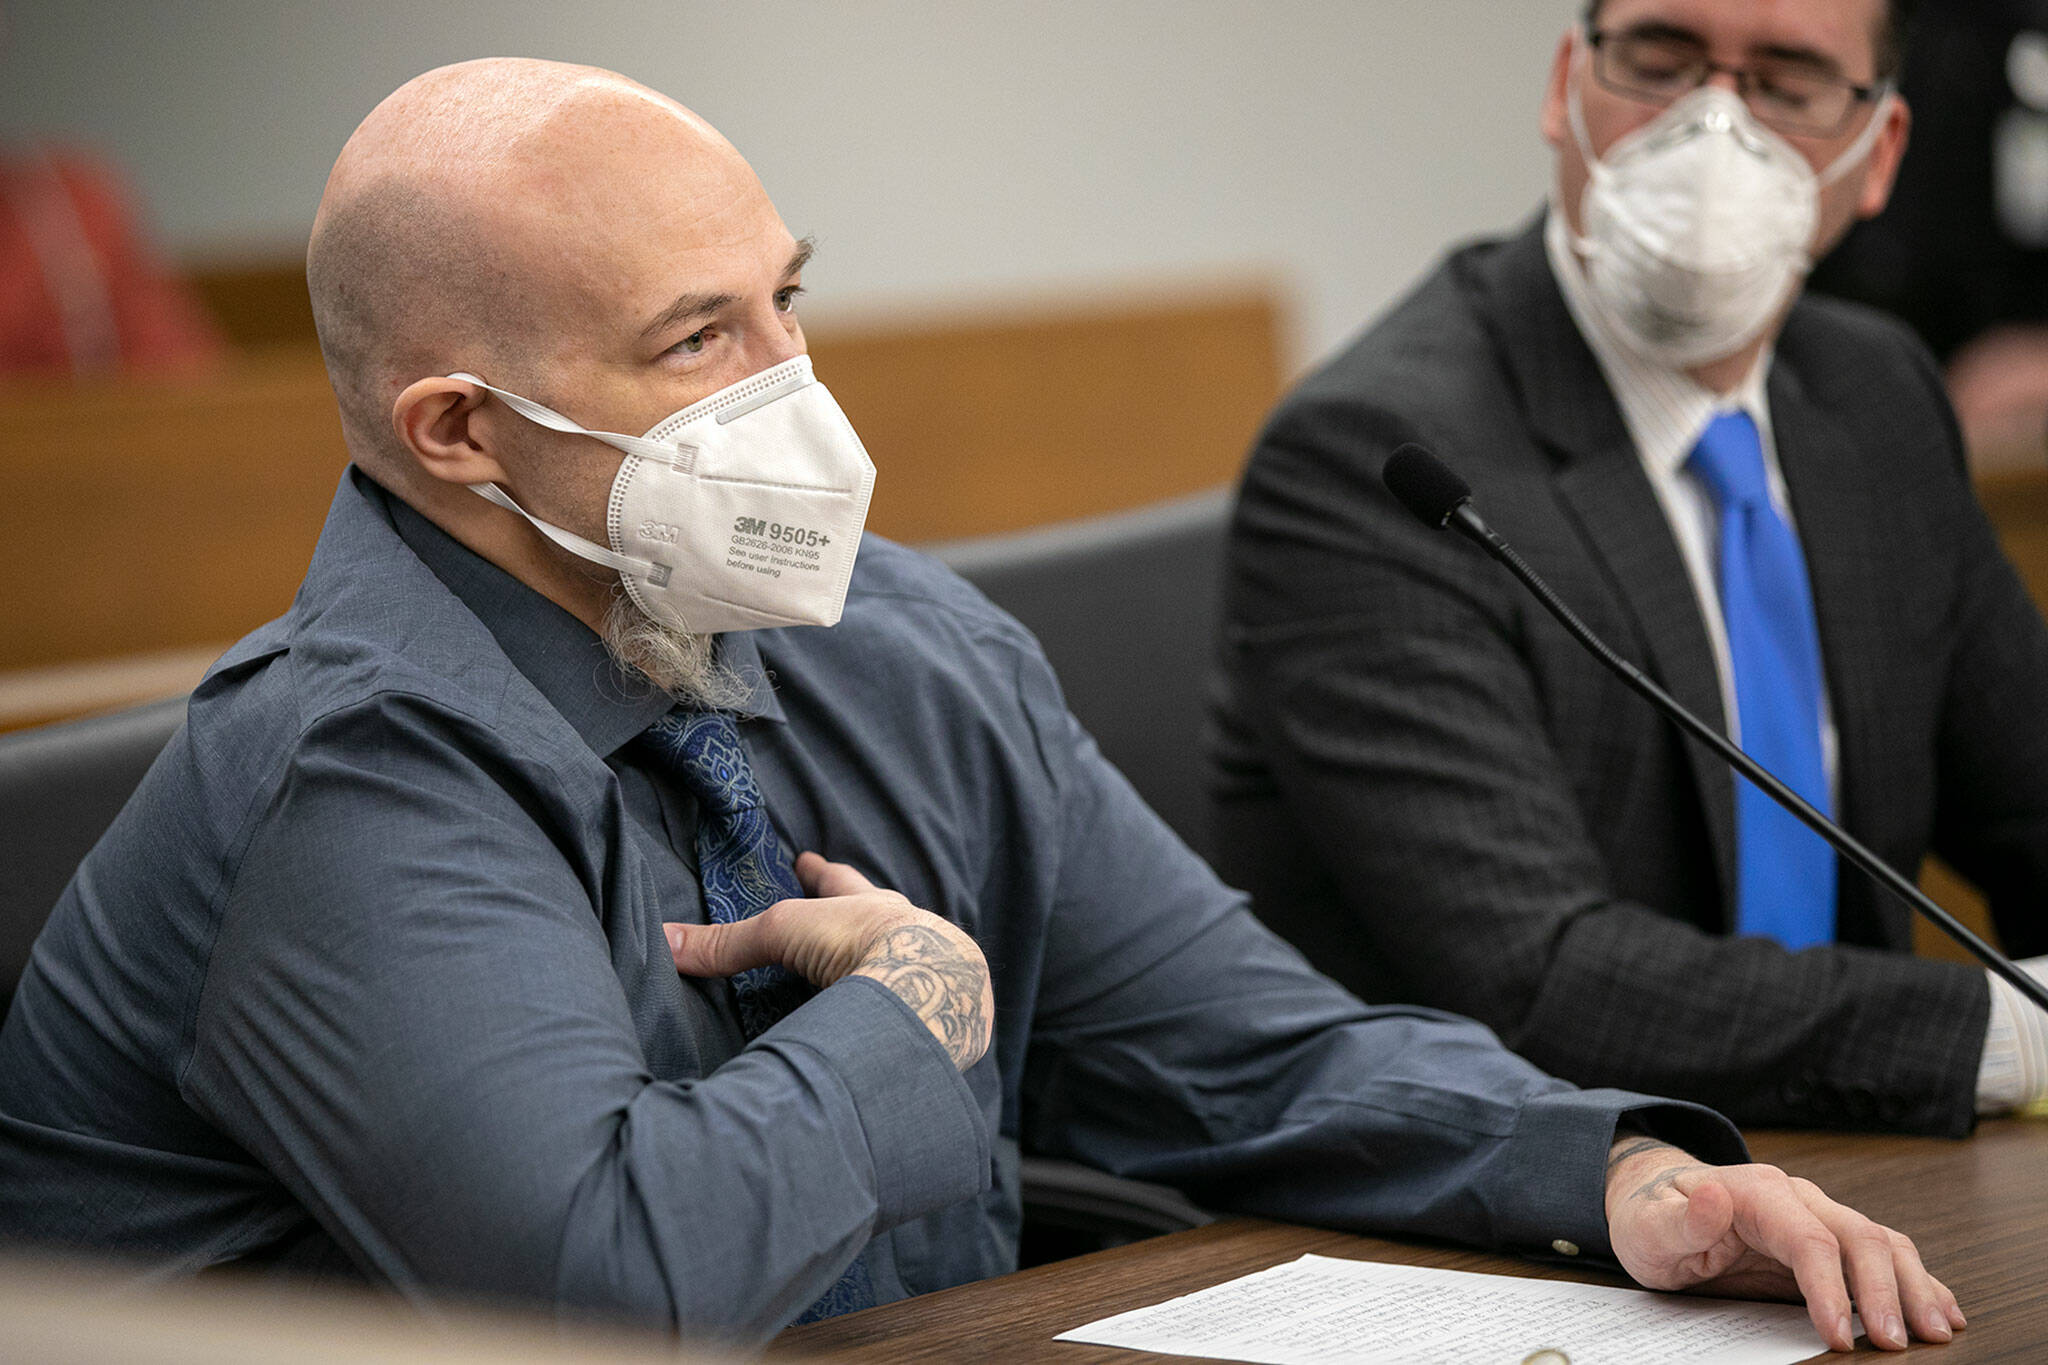 Eric Krueger, 46, who was convicted for his role in a 1997 double homicide in Marysville and originally sentenced to life in prison, speaks in court during his resentencing Tuesday at the Snohomish County Courthouse in Everett. (Ryan Berry / The Herald)